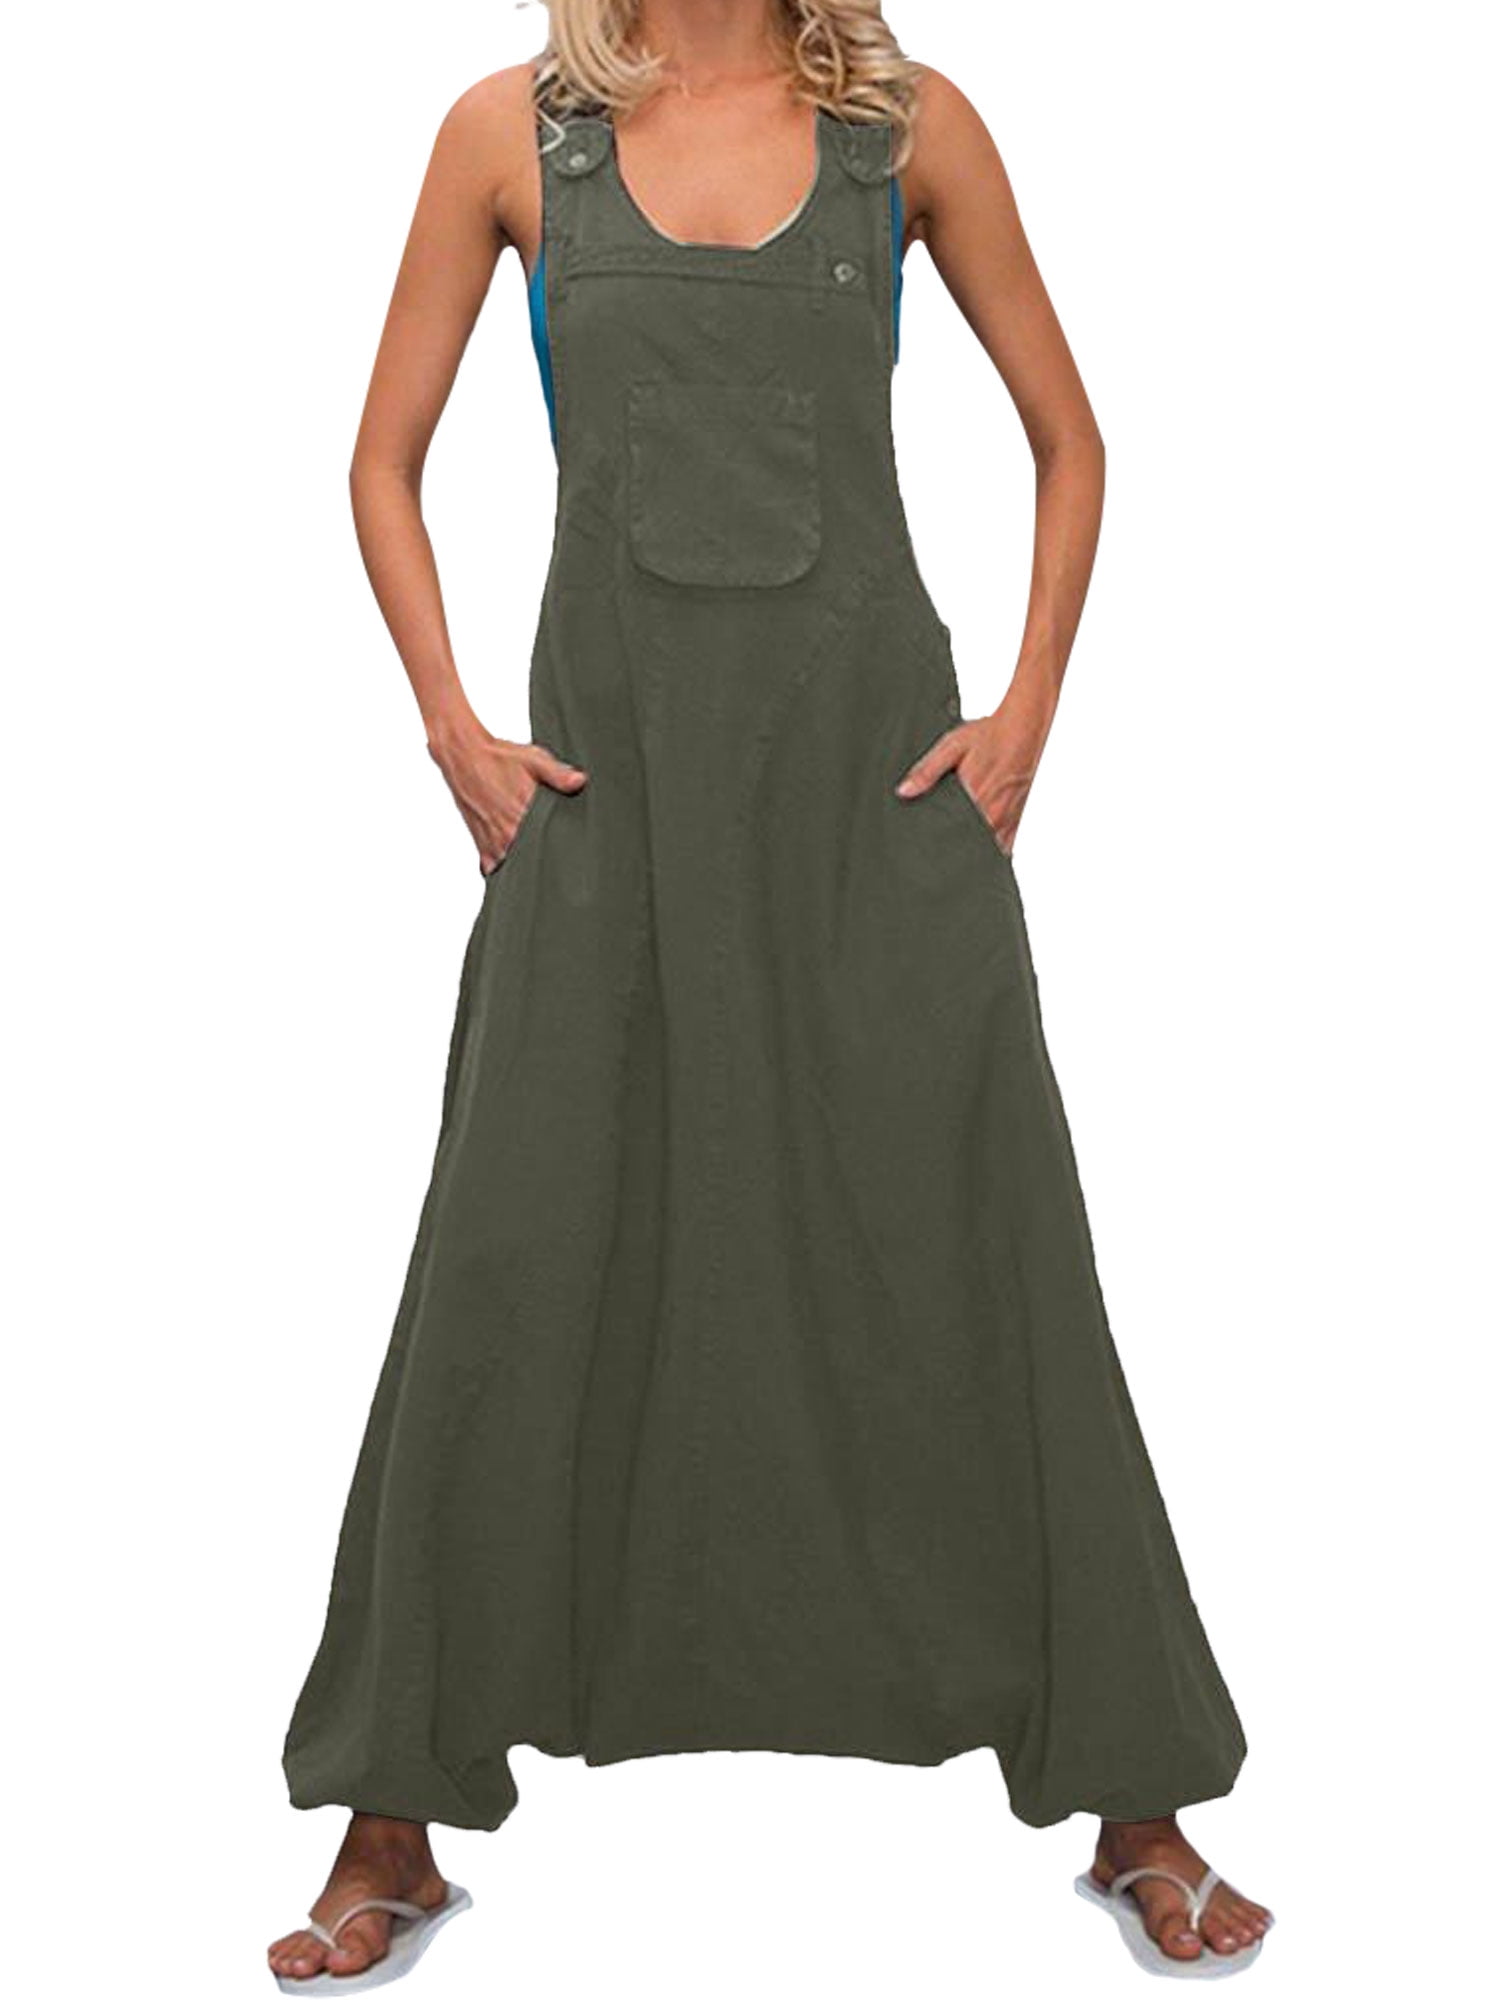 army green overall dress